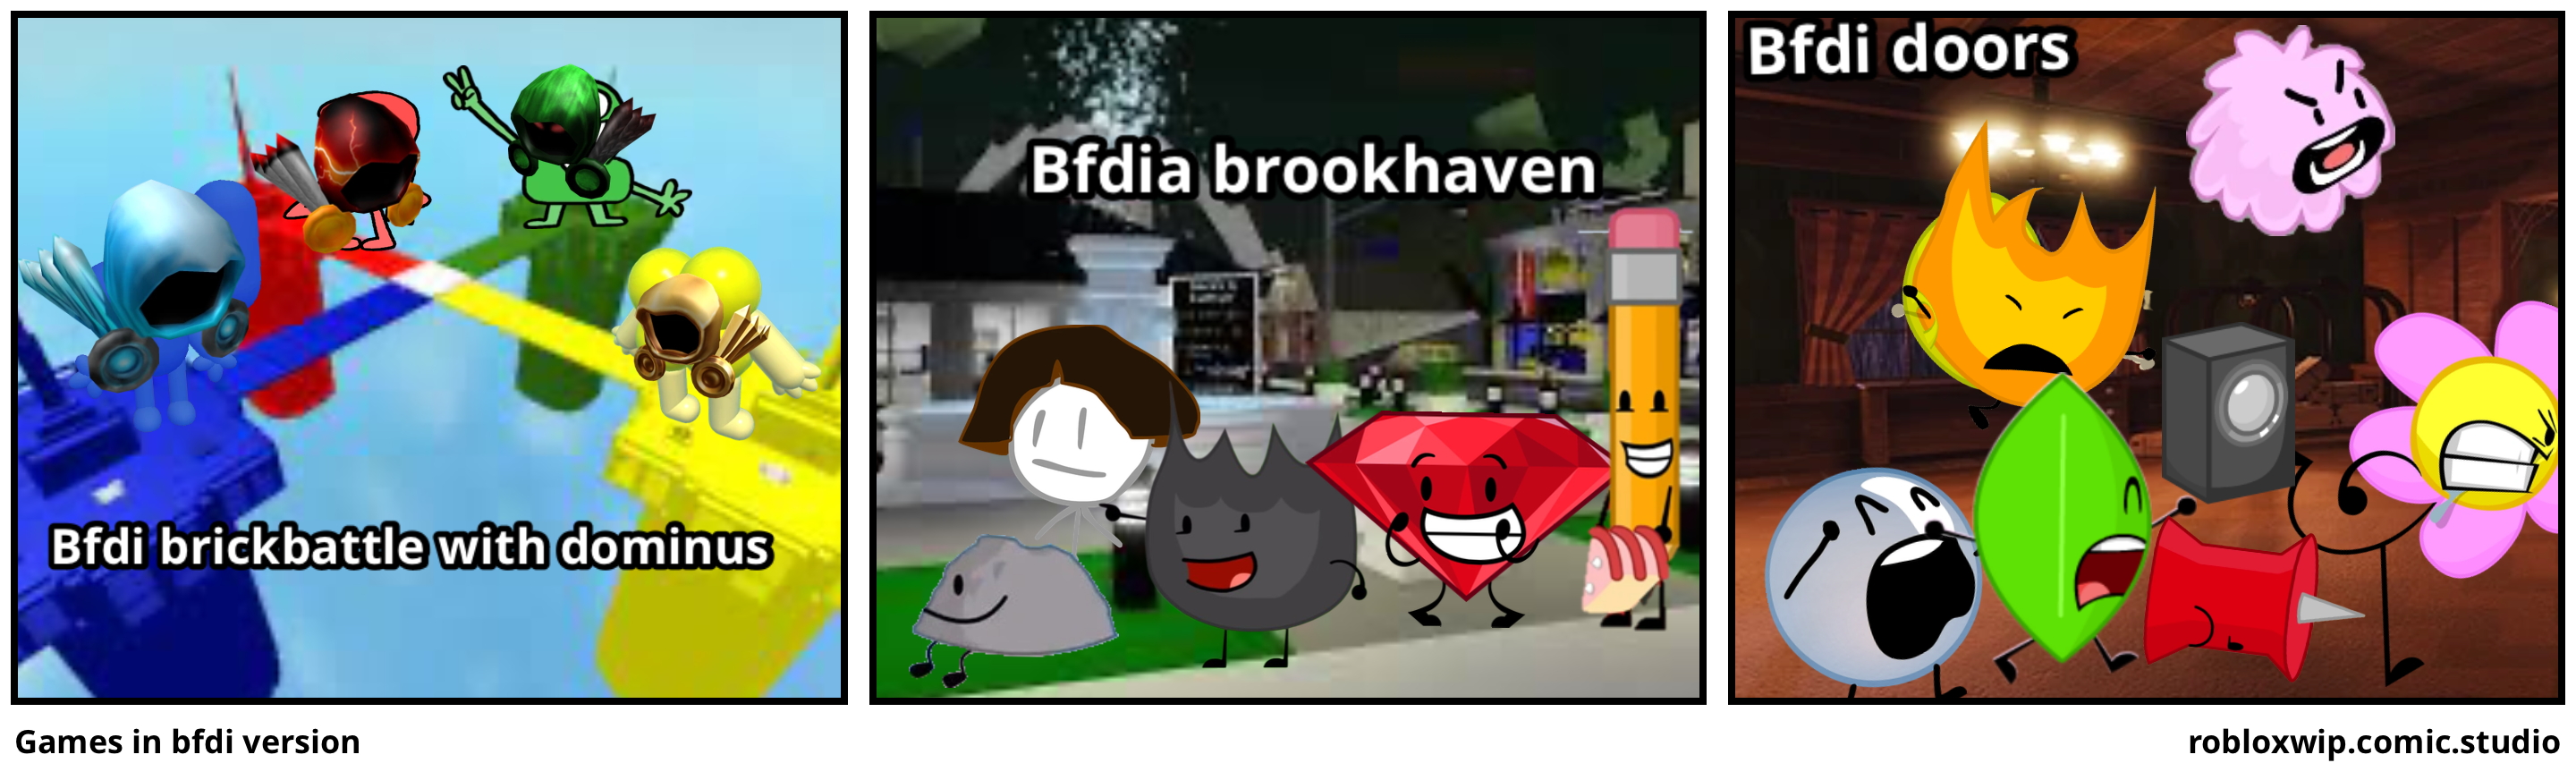 Games in bfdi version